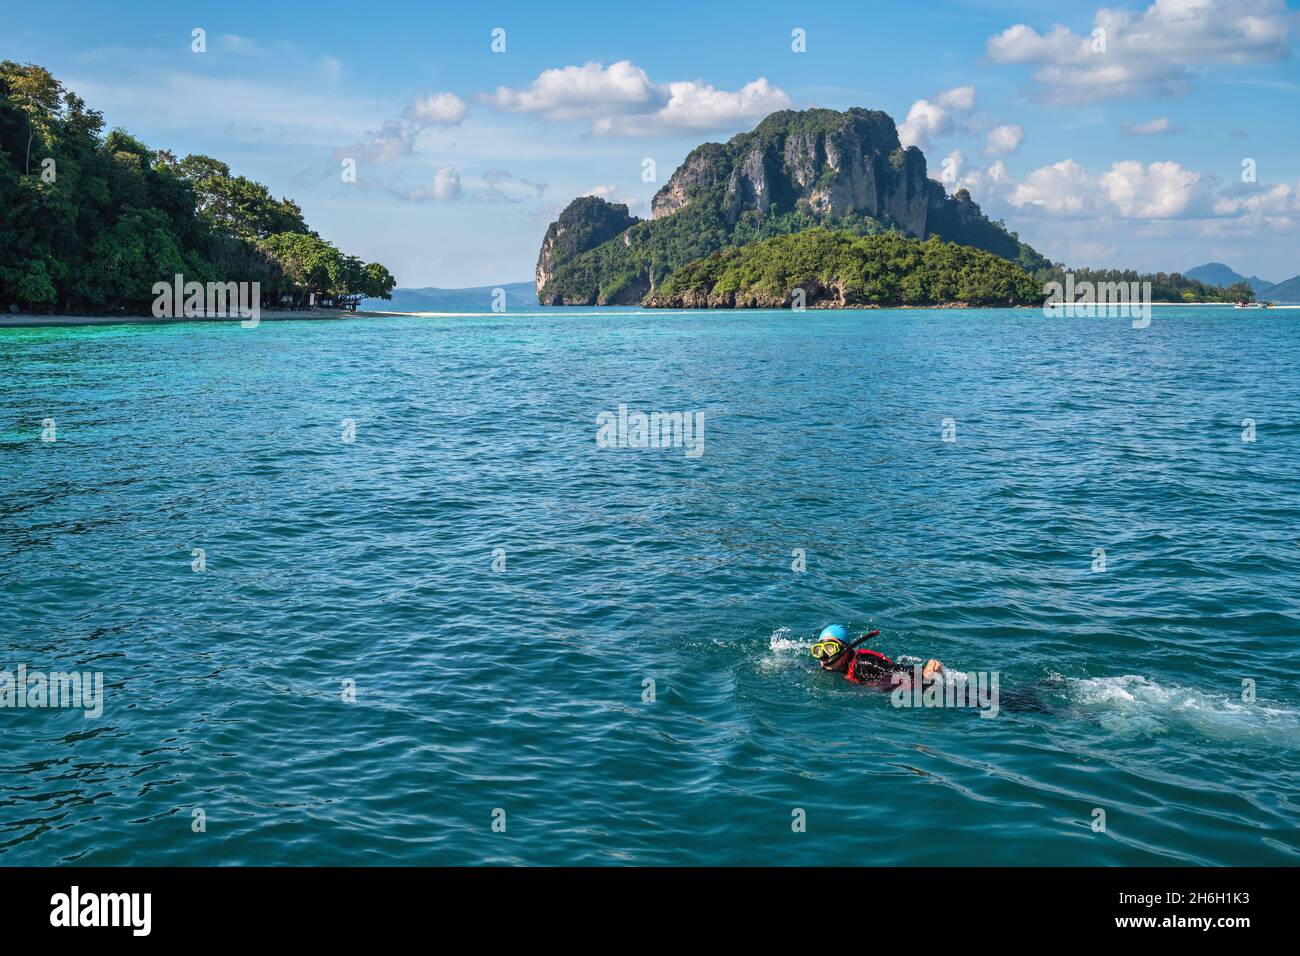 Tropical islands view with snorkeling driving tourist at ocean blue sea water and white sand beach, Krabi Thailand nature landscape Stock Photo